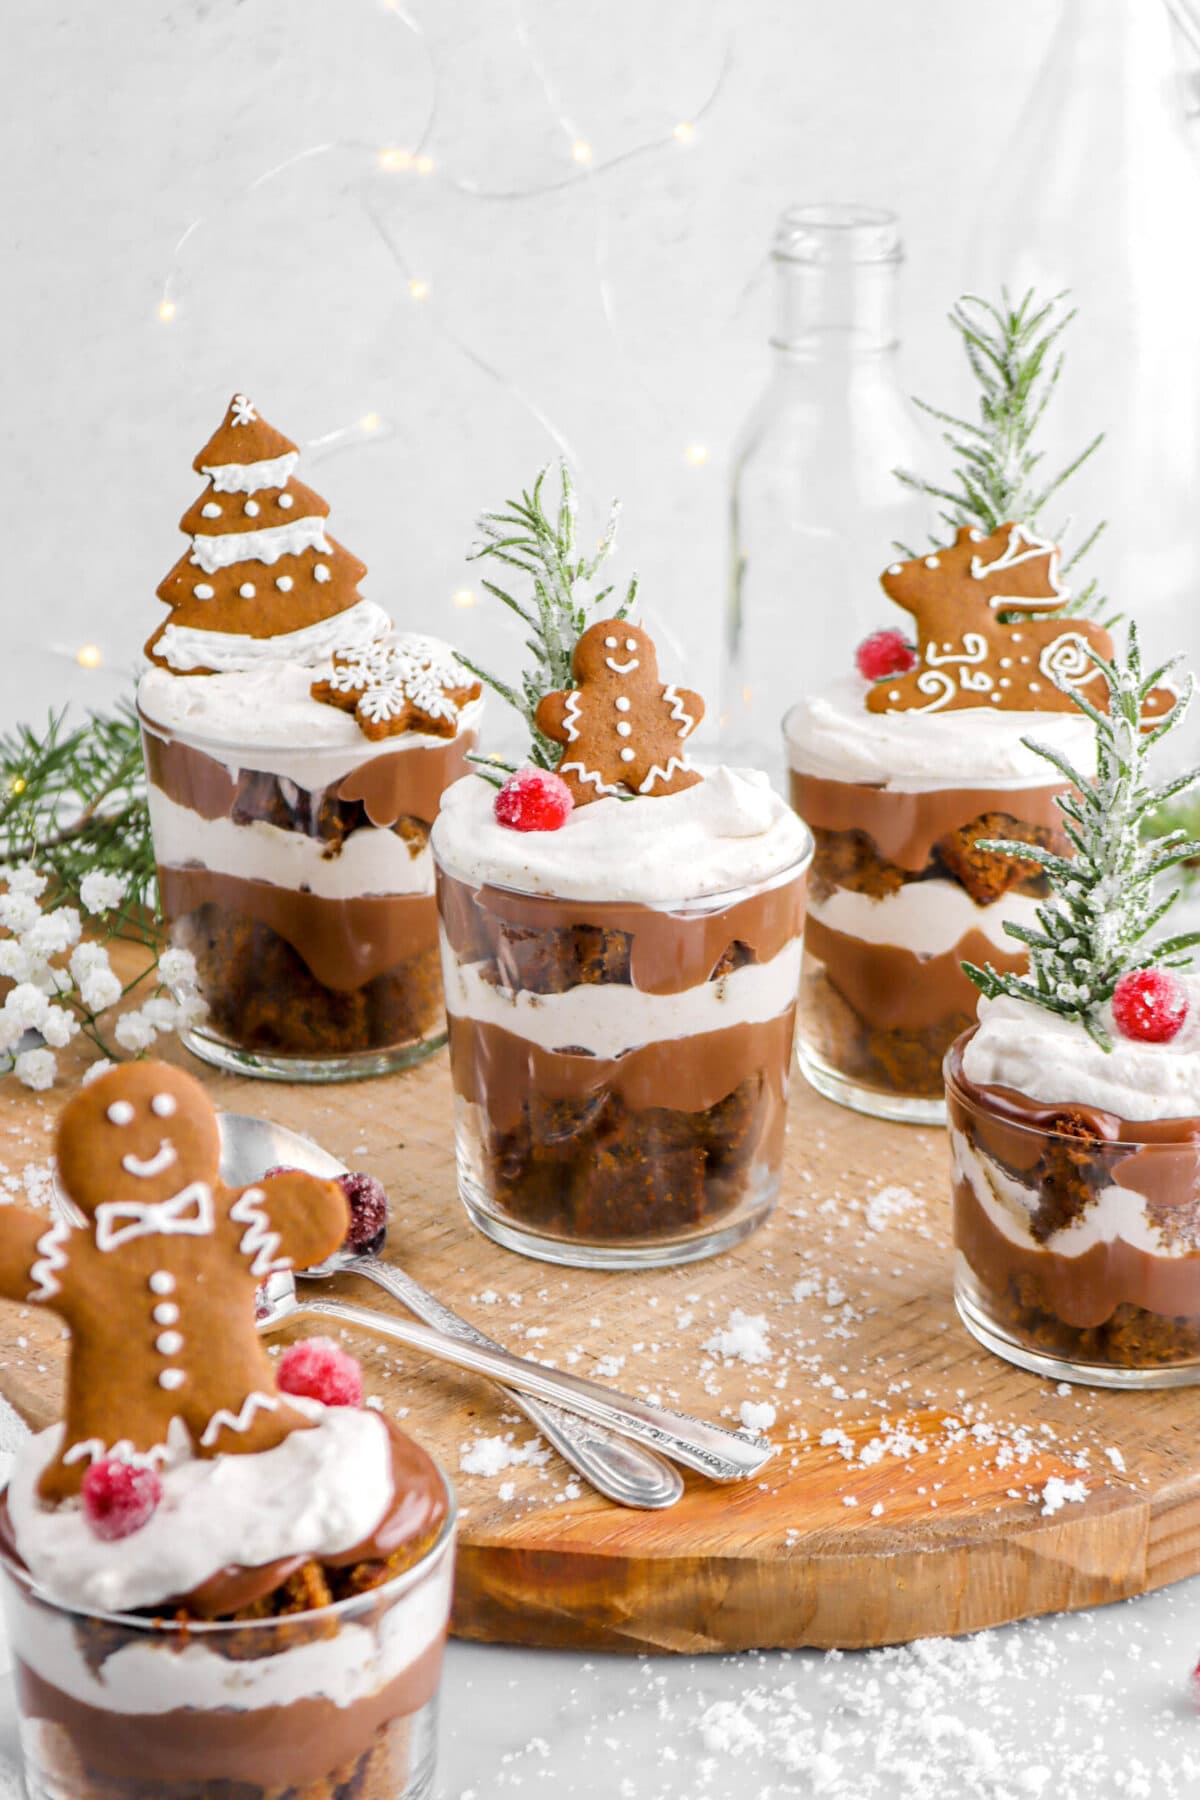 Gingerbread and Chocolate Pudding Trifle with Spiced Chantilly Cream